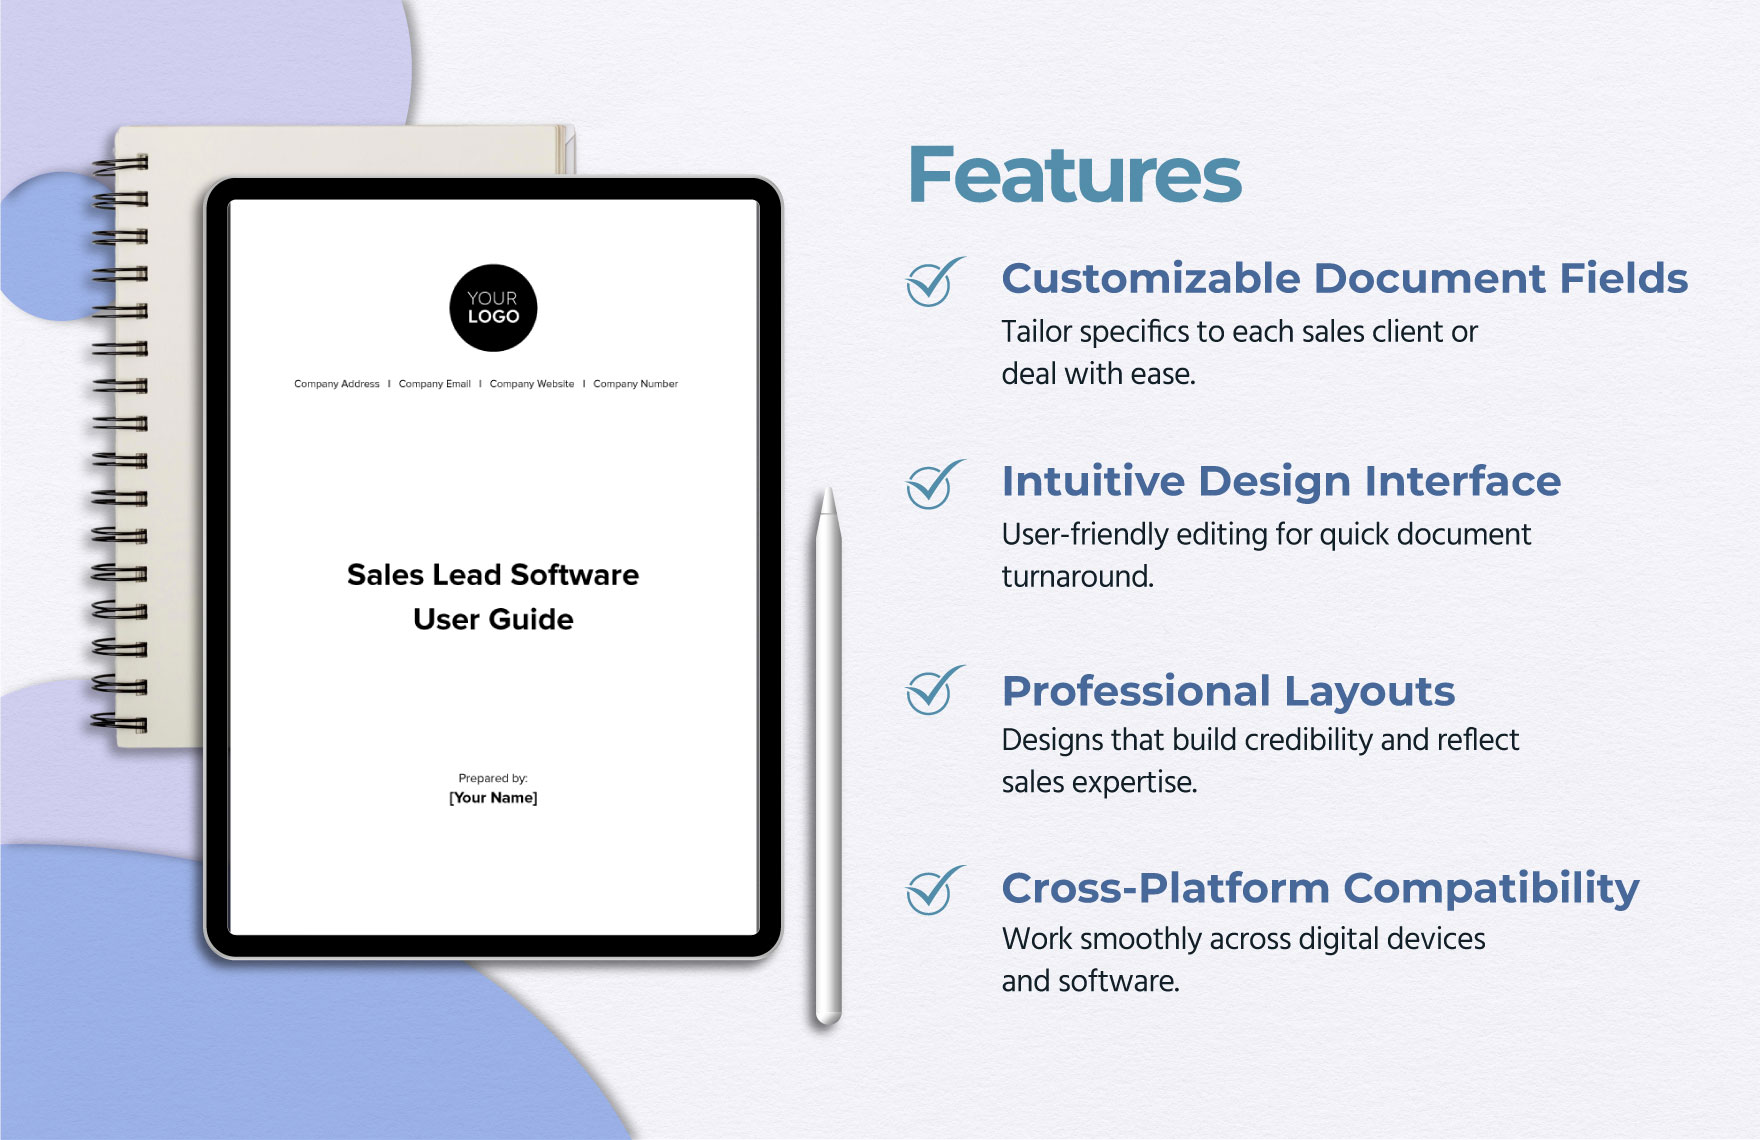 Sales Lead Software User Guide Template